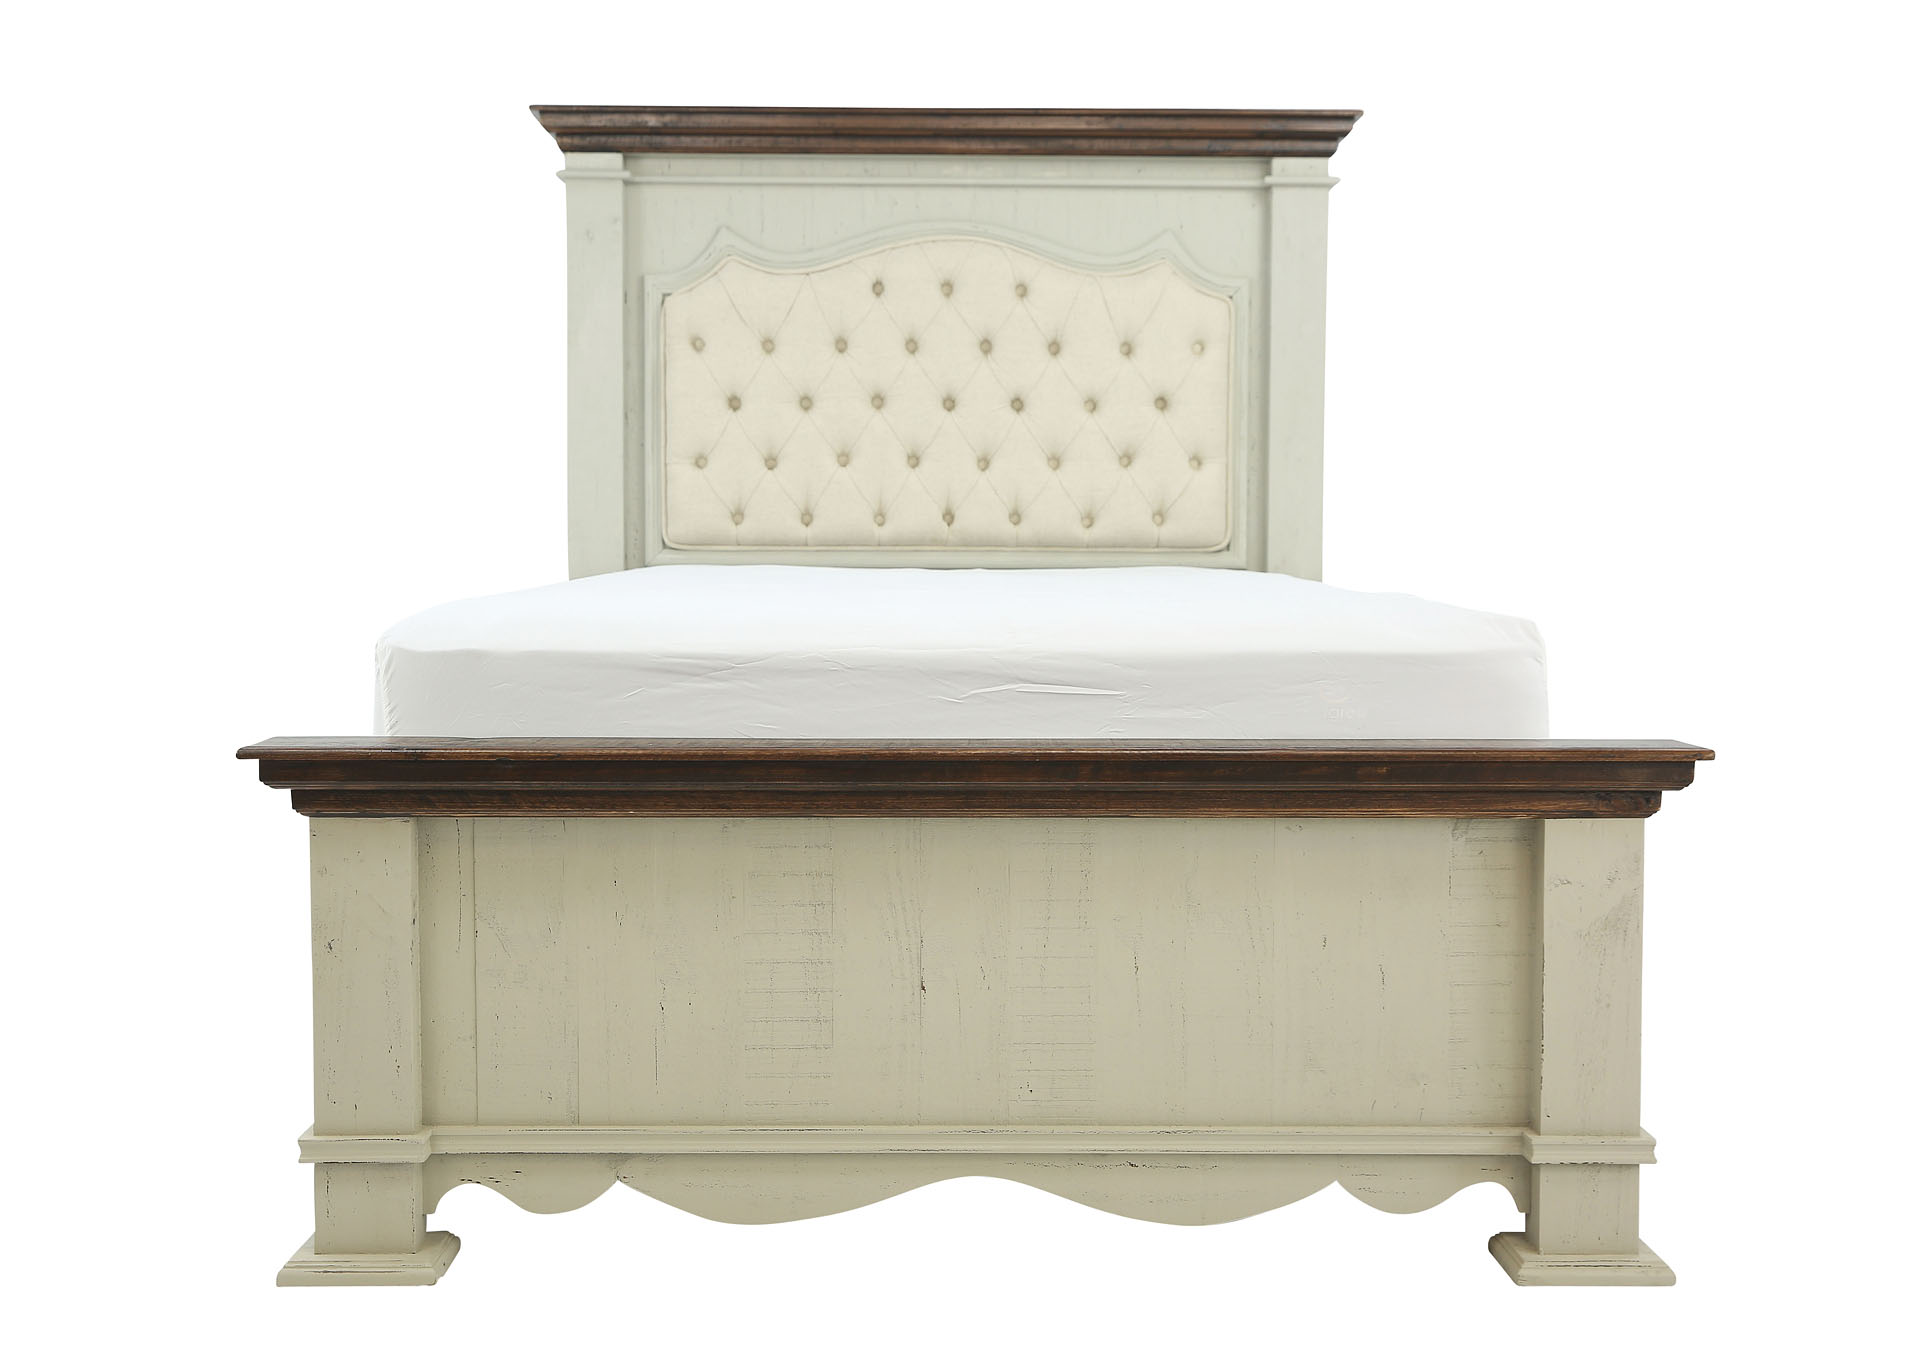 FIFTH AVENUE TWO TONE QUEEN BED